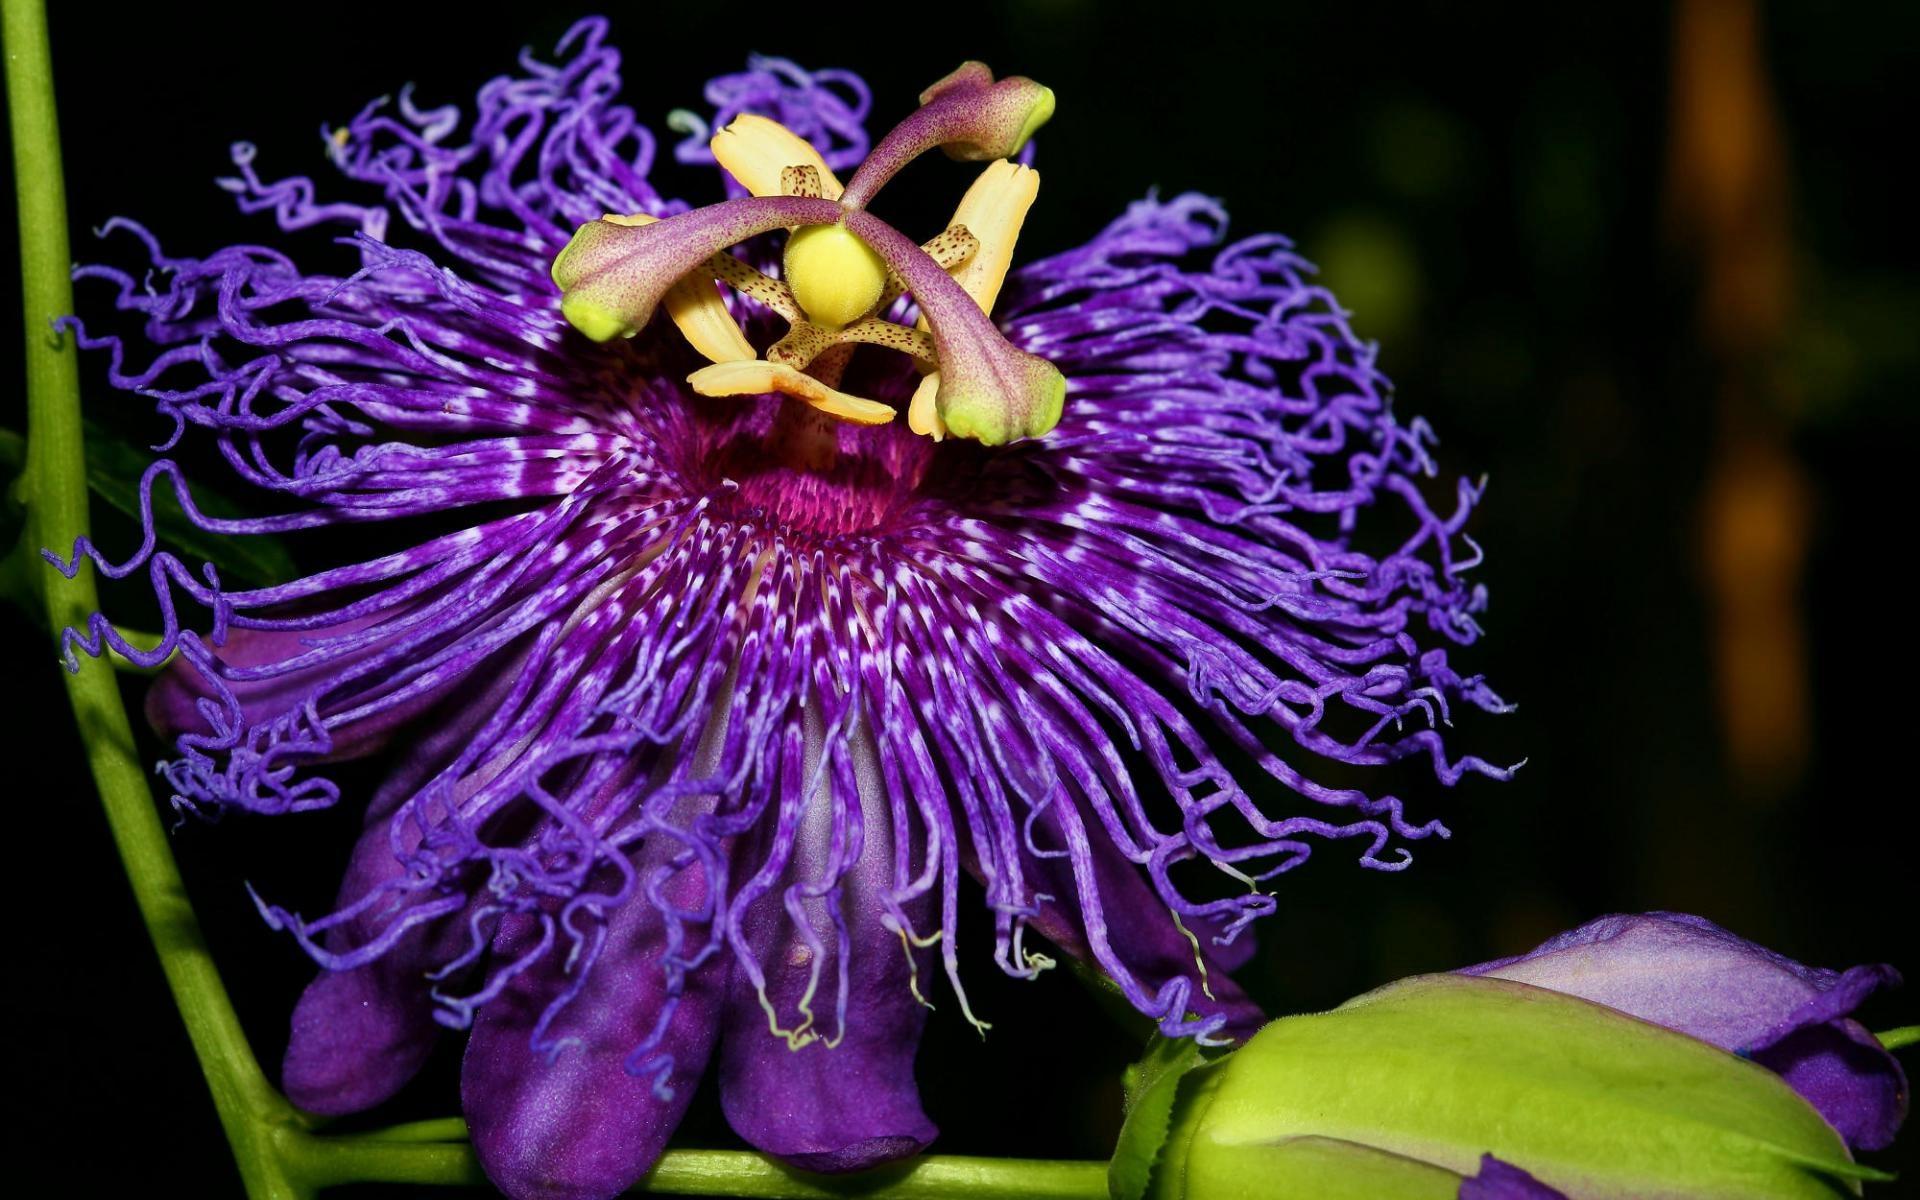 Download wallpaper 1920x1200 inspiration, passion, flower